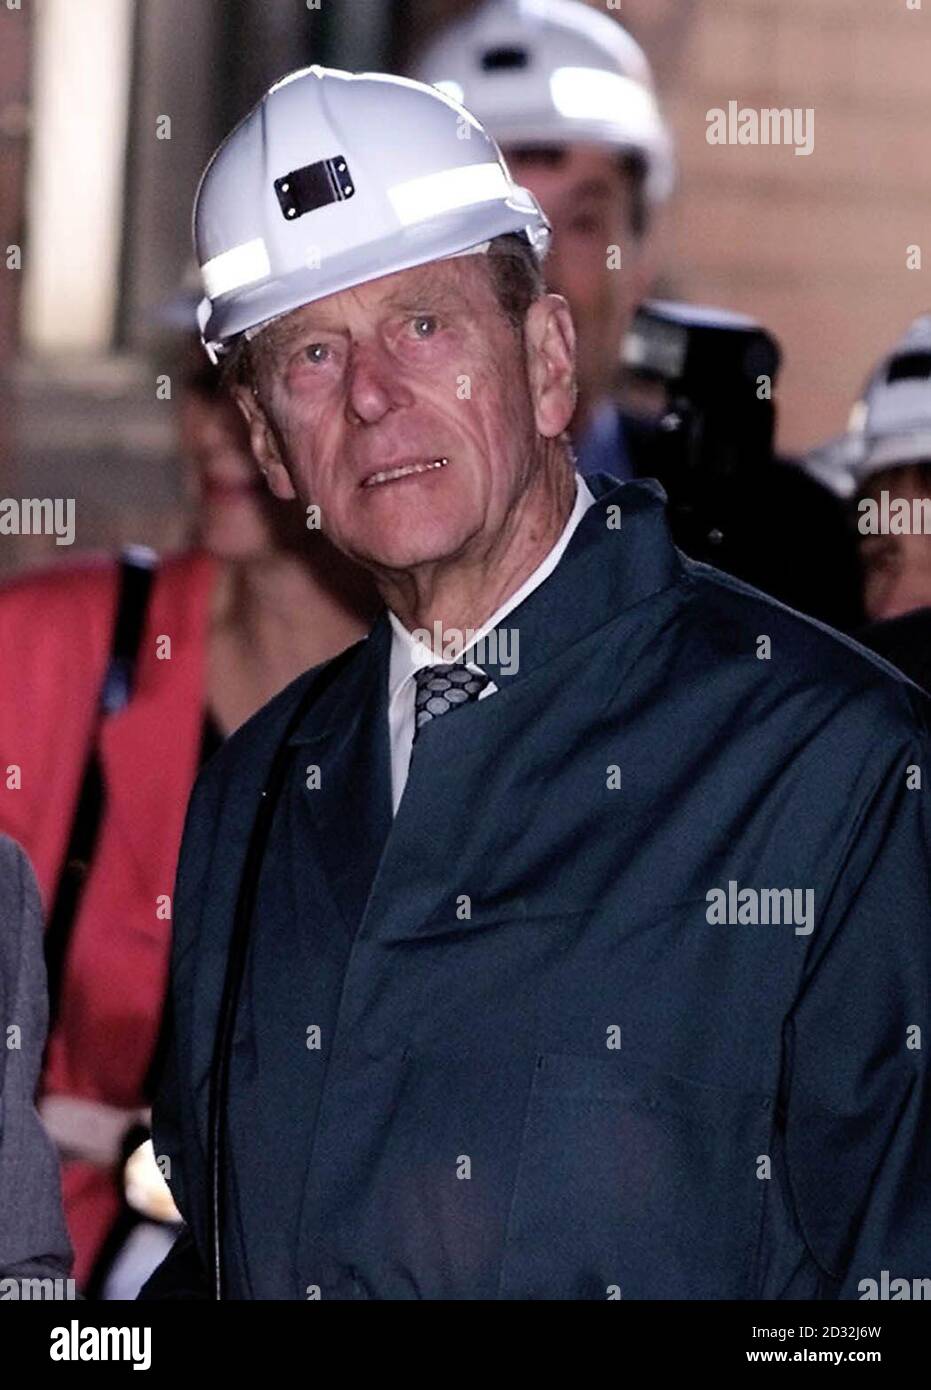 The Duke of Edinburgh wearing a protective helmet during his visit to The National Mining Museum, Overton near Wakefield. The Prince was the special guest of the National Coal Mining Museum, where he was officially opening more than 6m of new facilities. * ... which is the first phase of the redevelopment of the attraction. The Duke of Edinburgh today said it was extraordinary that the British coal industry had now become a museum piece as he donned protection clothing and a helmet to descend 500ft down a former pit. He spent about 15 minutes underground before emerging for the official ope Stock Photo